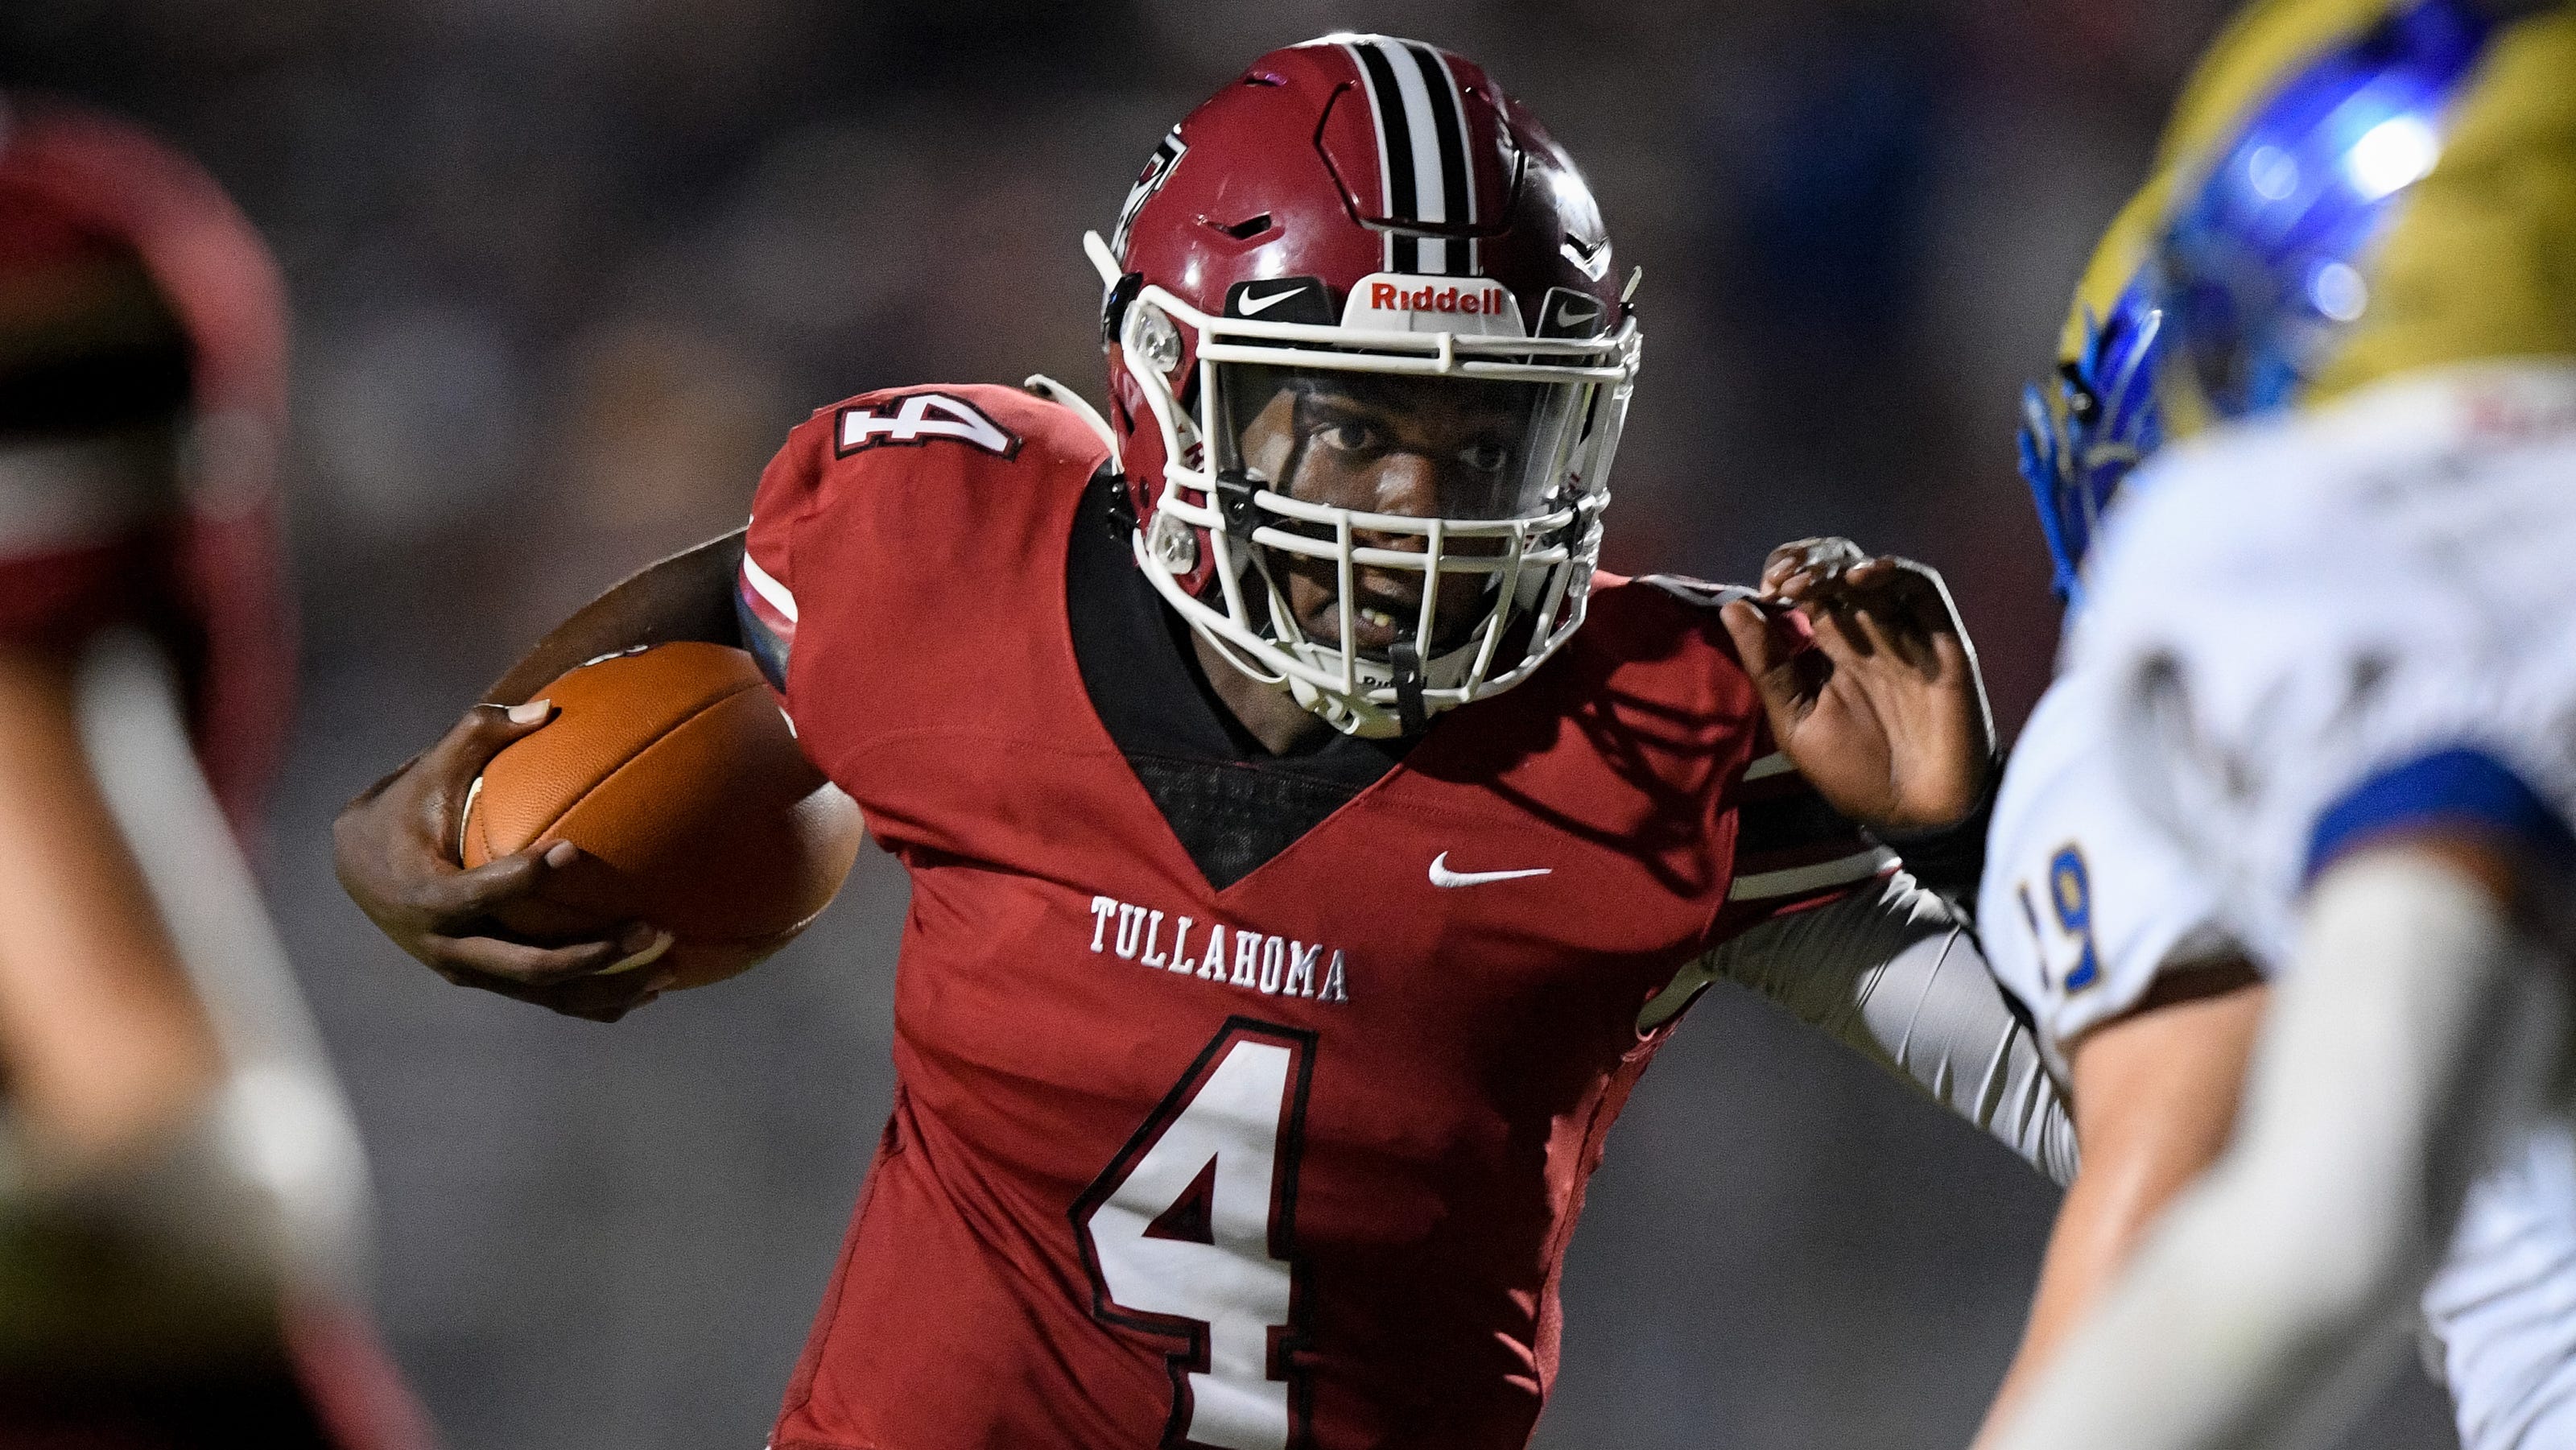 High school football: Tullahoma opens season with 38-13 rout of Shelbyville